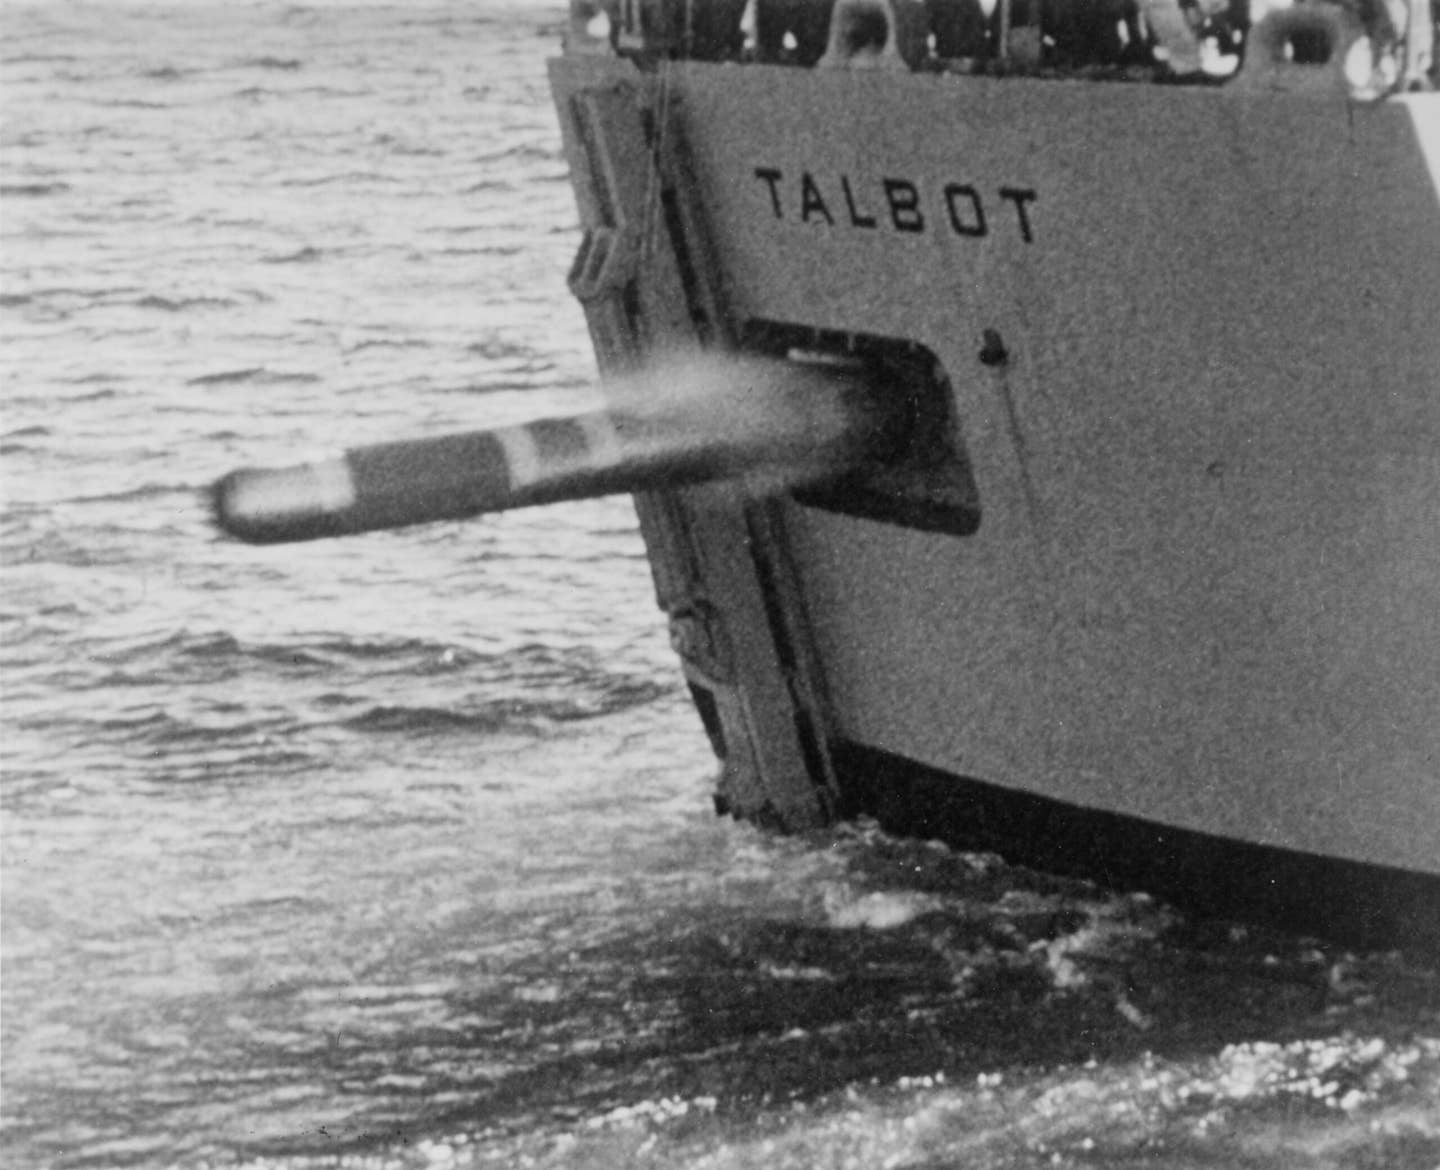 The Mk 48 torpedo was intended for use in both submarines and surface ships, in the latter for the ASW role. Twin Mk 25 tubes for Mk 48 torpedoes were fitted in guided missile frigates (DLG/DLGN) in their after deckhouse and in escort ships (DE/DEG) in their stern counters. This photo shows a Mk 48 being launched from the USS <em>Talbot</em> (DEG-4). <em>Lockheed Shipbuilding; US Navy</em>